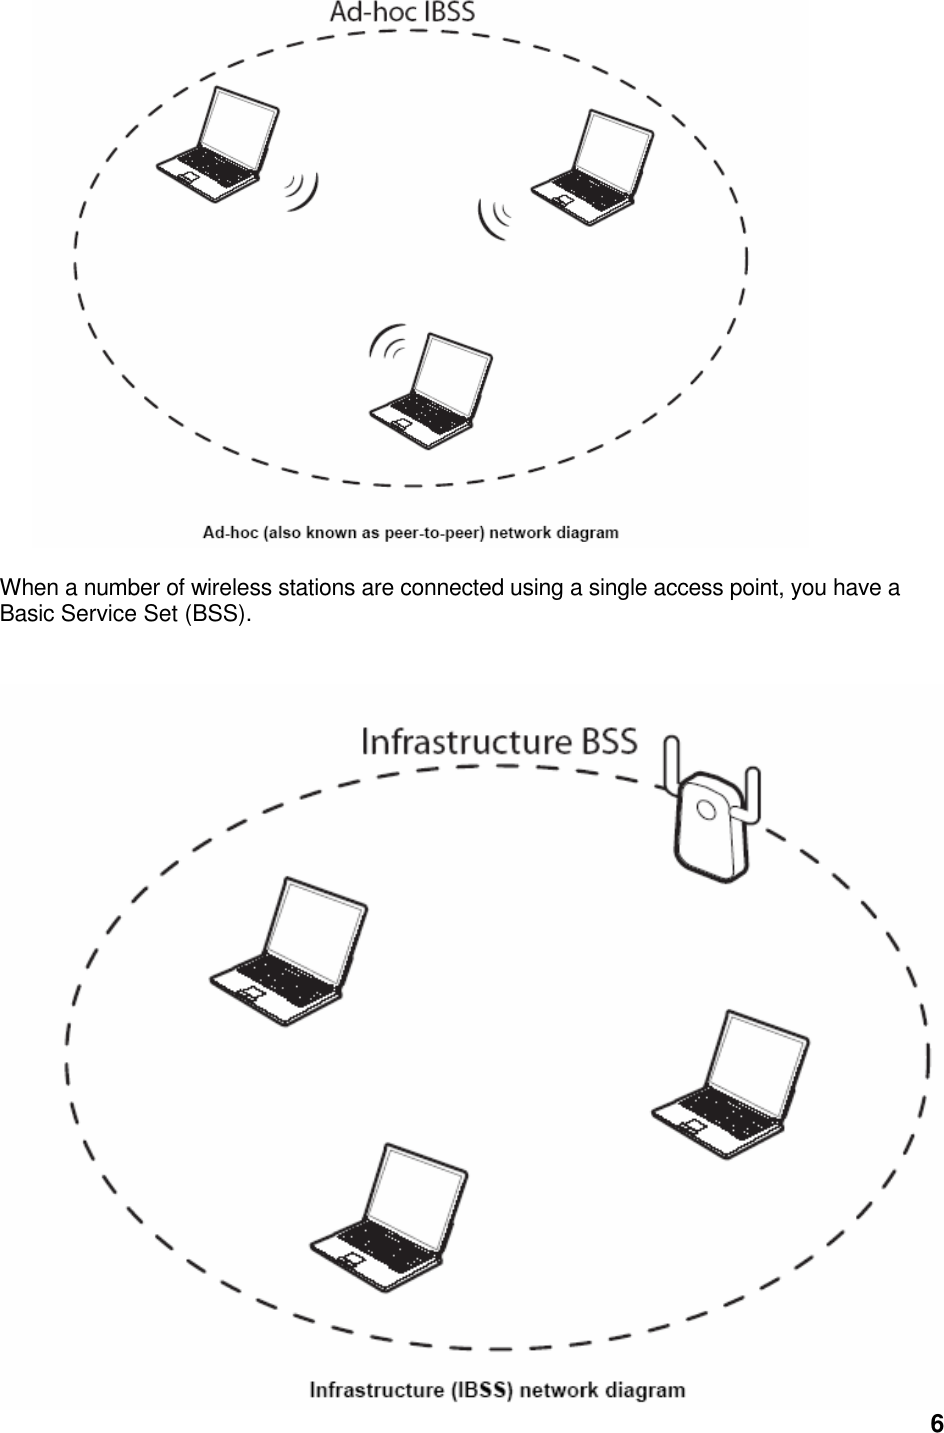   When a number of wireless stations are connected using a single access point, you have a Basic Service Set (BSS).    6 